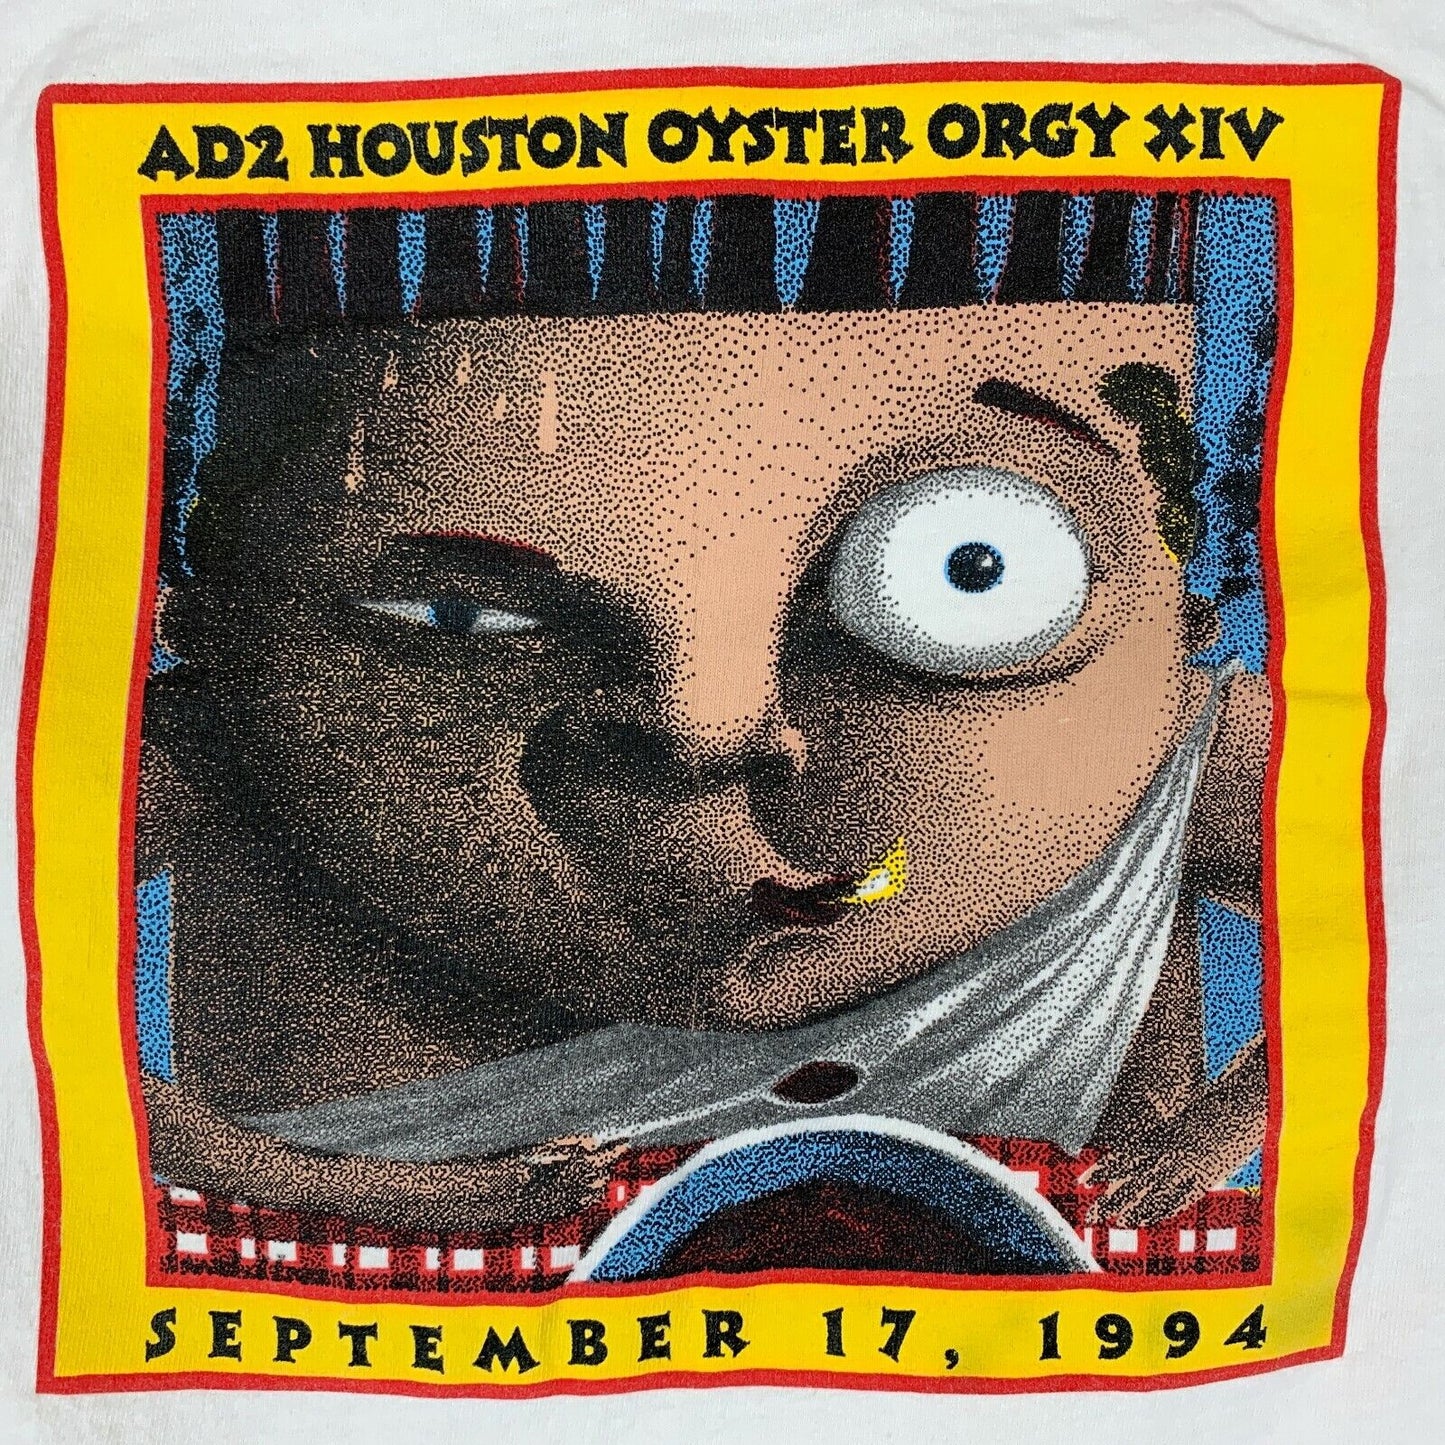 AD2 Houston Oyster Orgy Vintage 90s T Shirt 1994 Texas Ad 2 Made In USA Tee XL